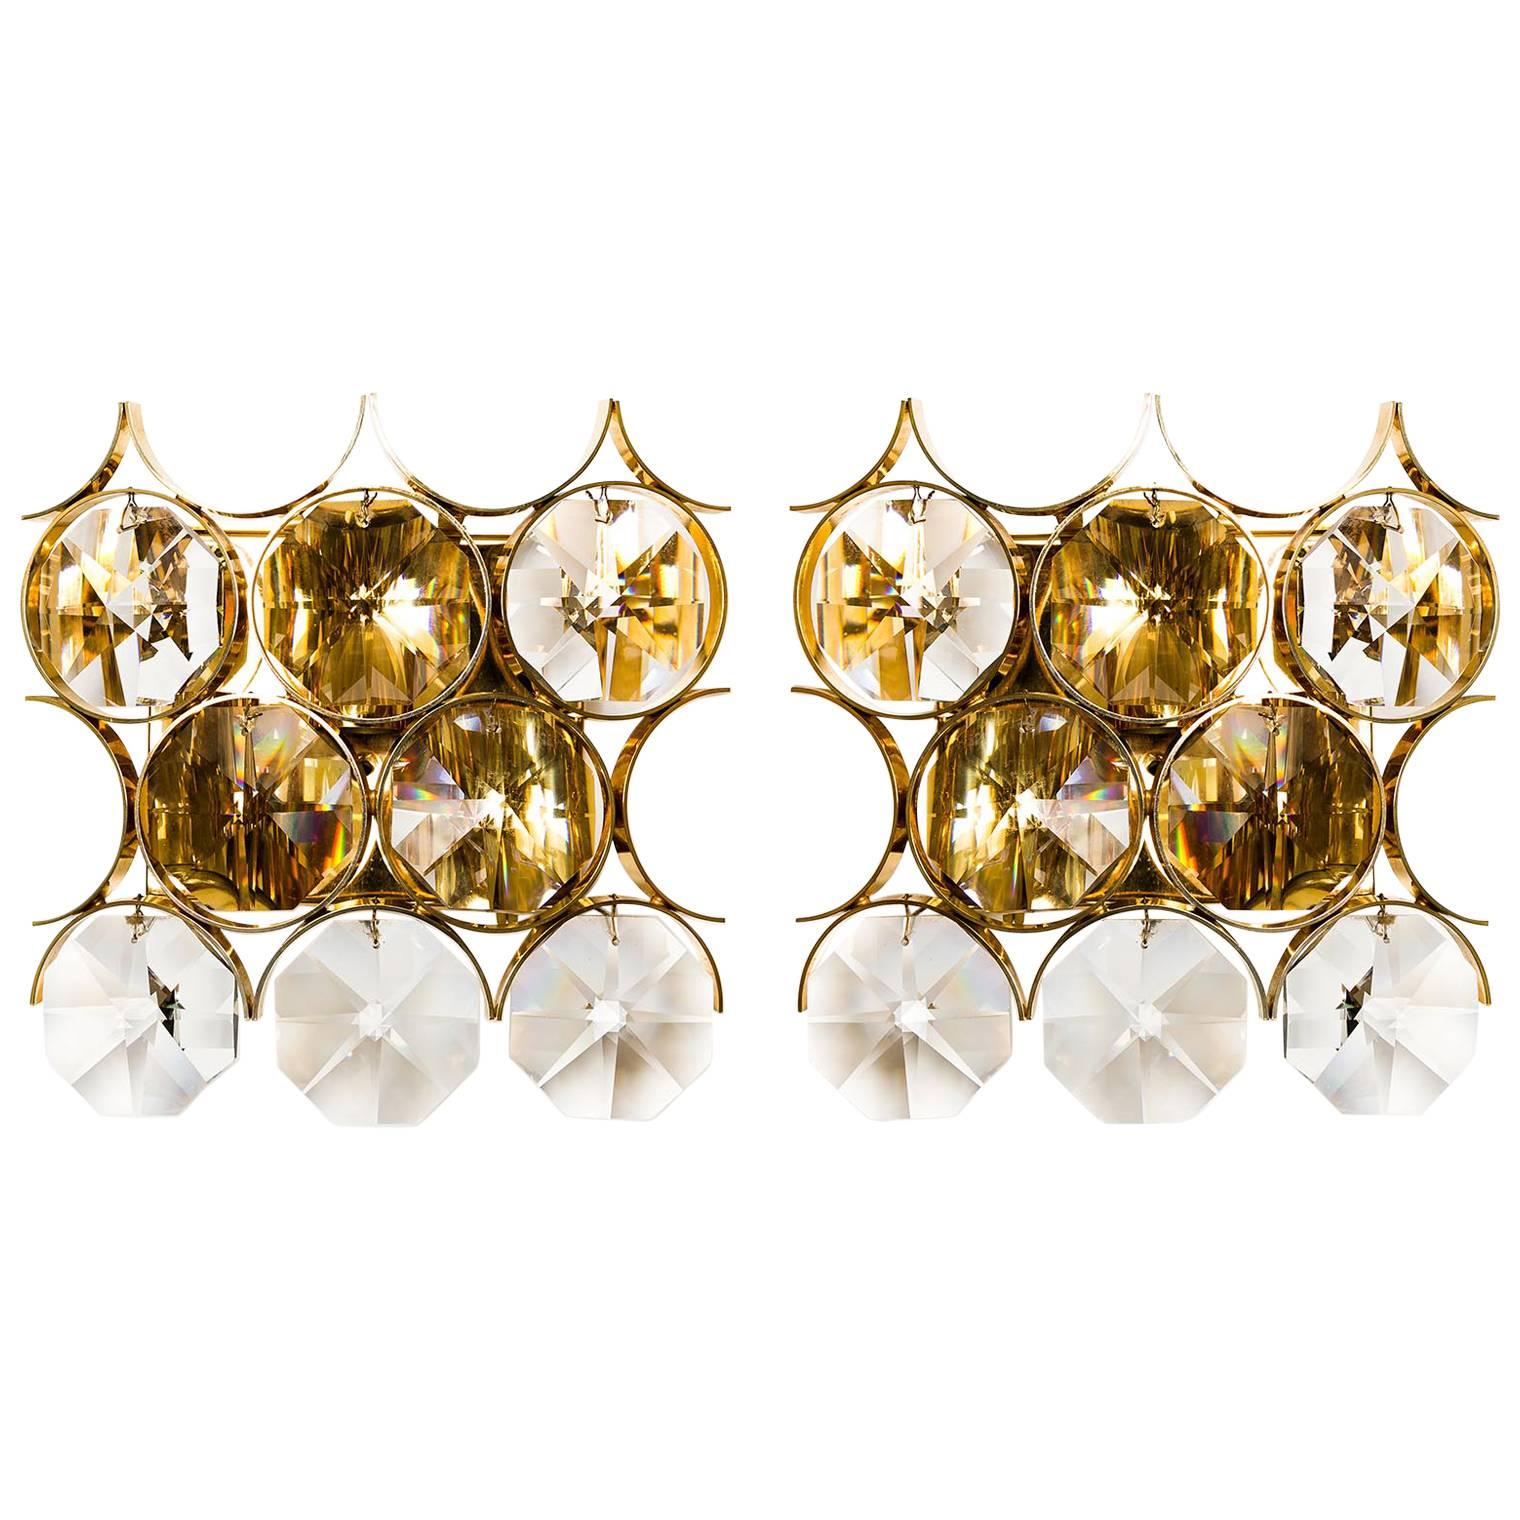 Pair of Palwa Sconces Wall Lights in Gilded Brass with Large Crystals, 1960s For Sale